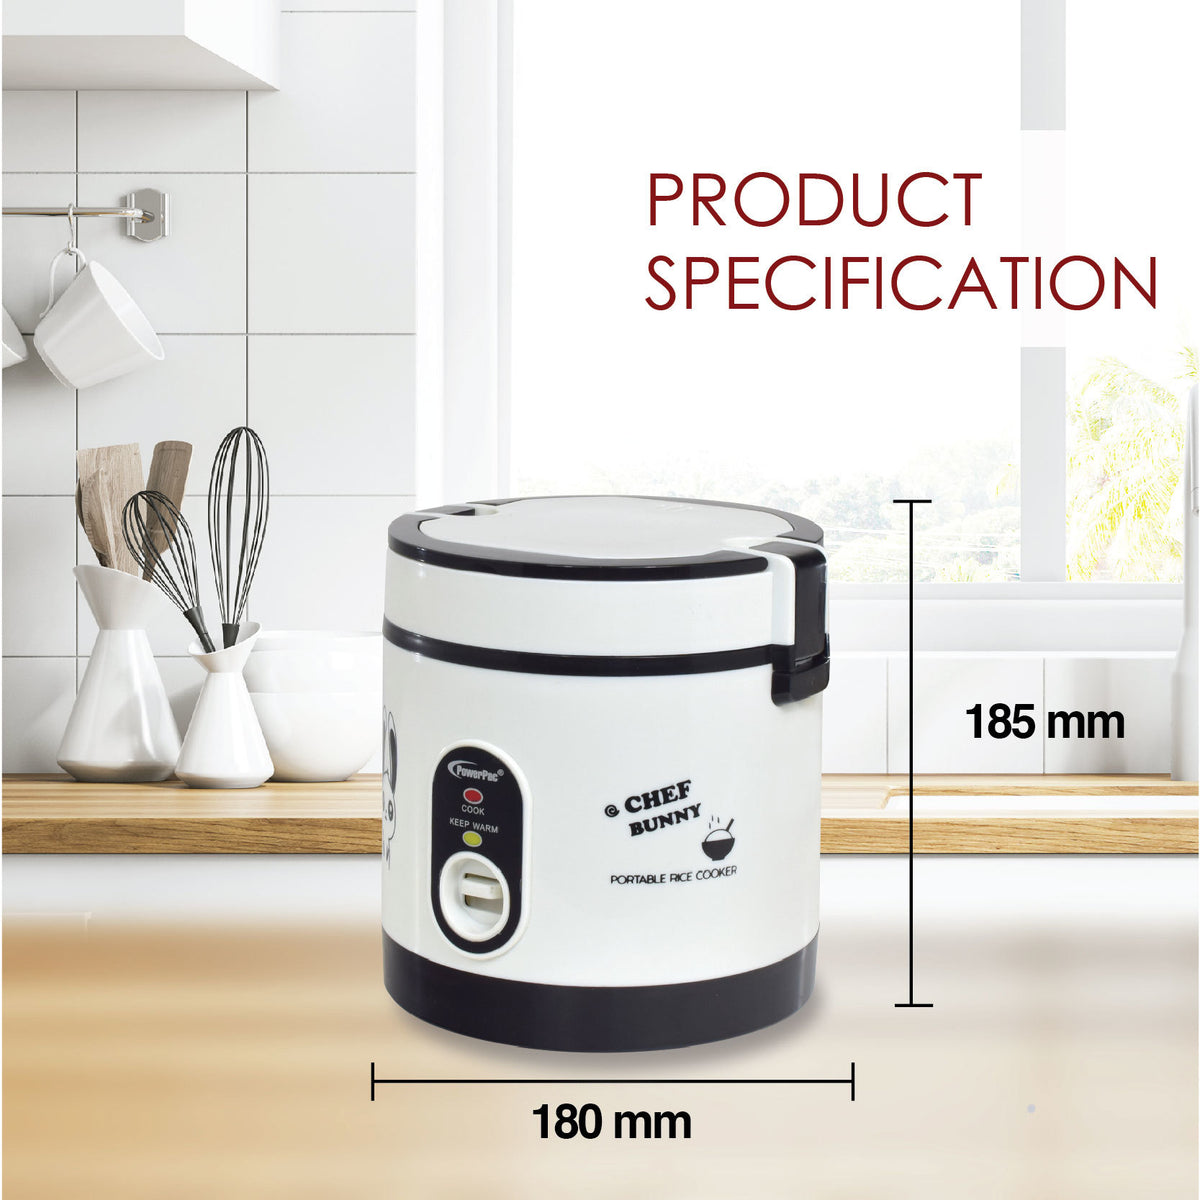 0.6L Portable Rice Cooker with Stainless Steel Steamer Food Tray (PPRC09) - PowerPacSG